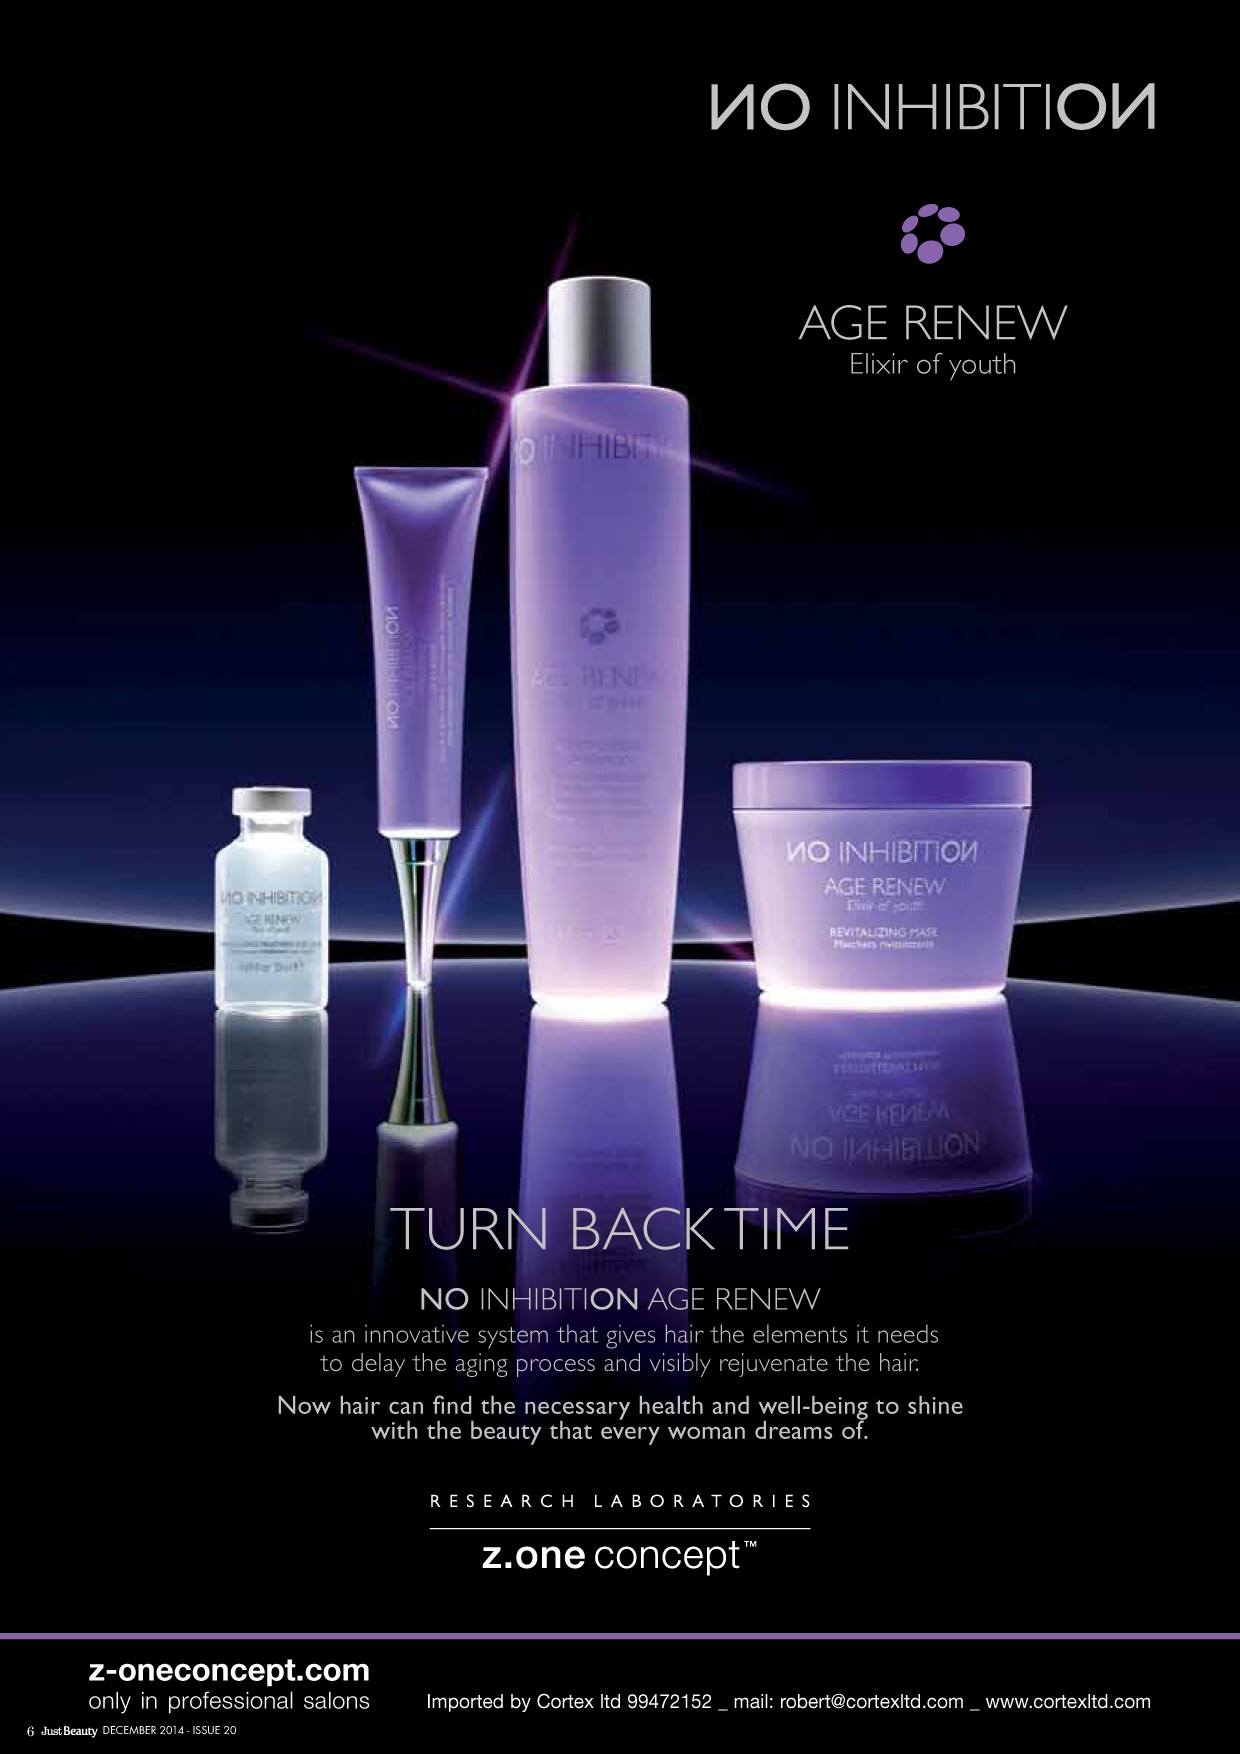 Just Beauty advert and write up on Age Renew Hair treatment - Cortex Ltd